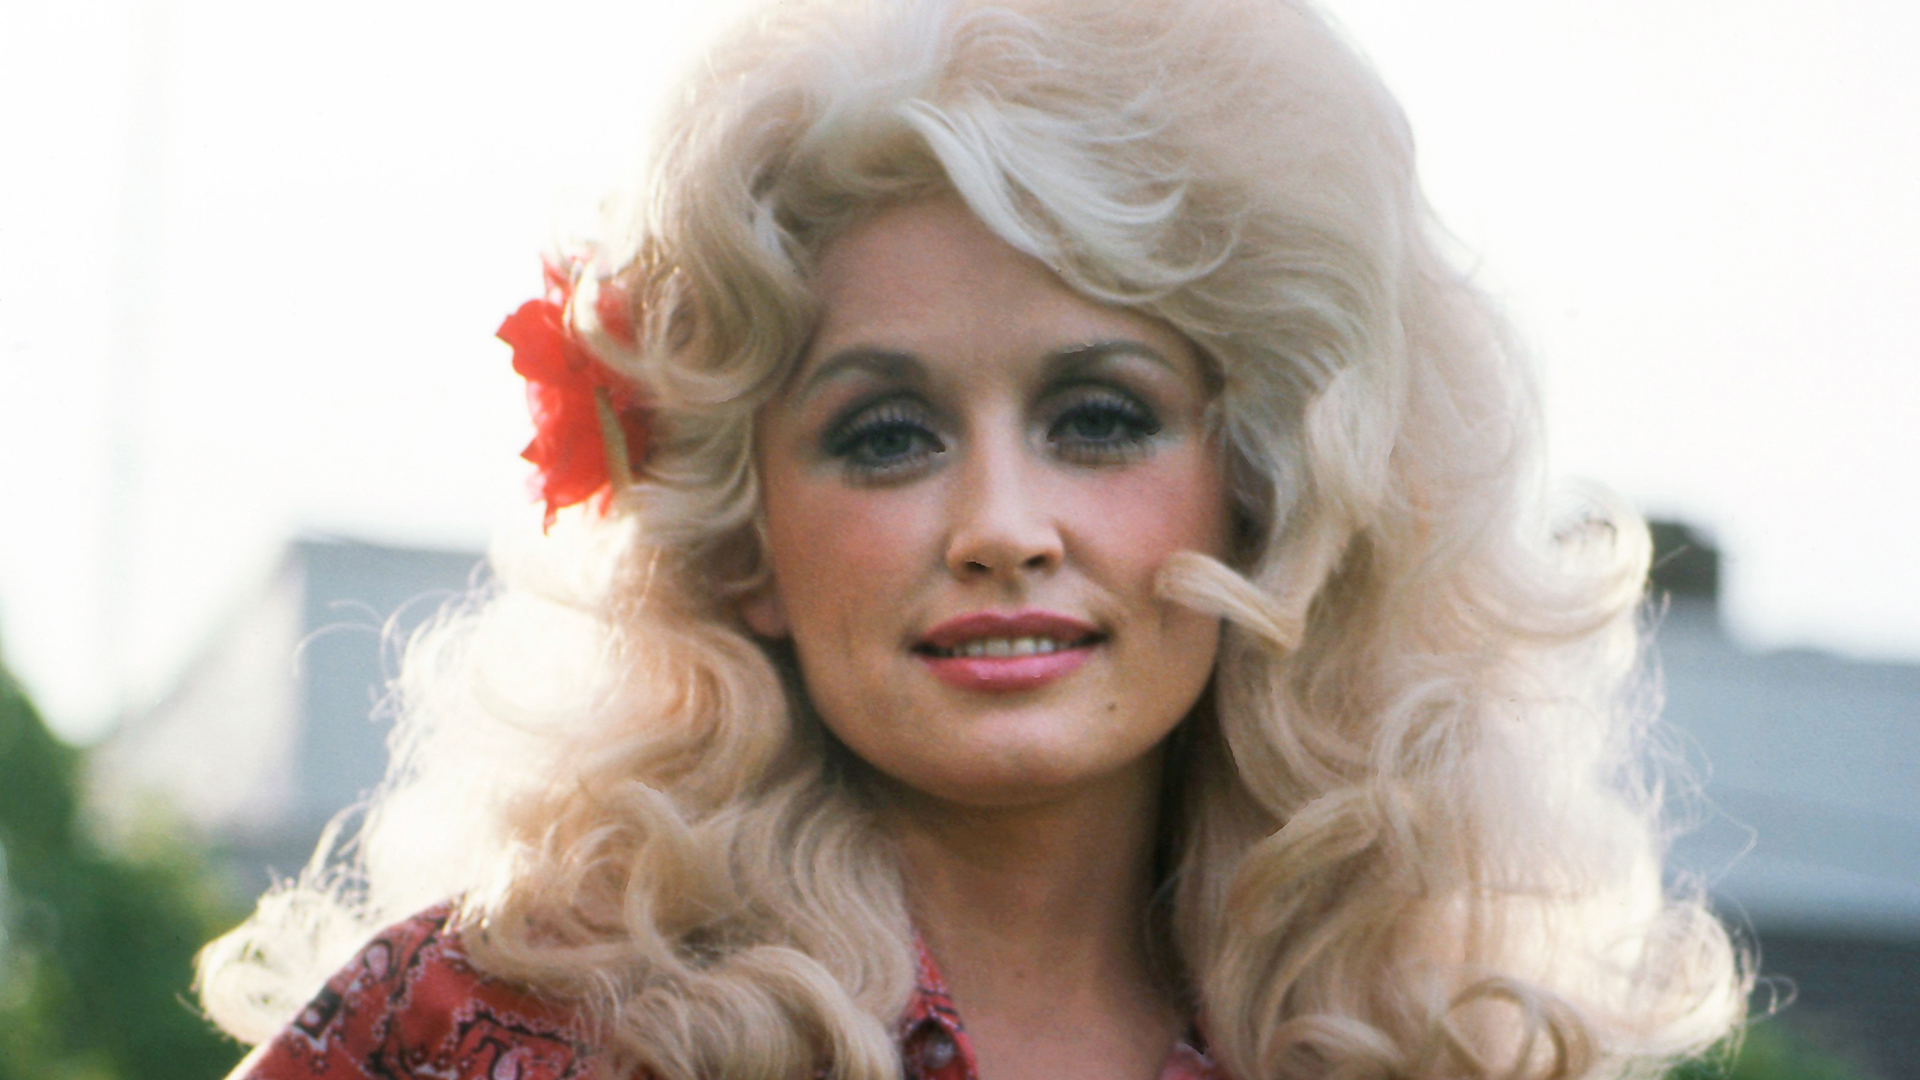 Young Dolly Parton with a classic smile.